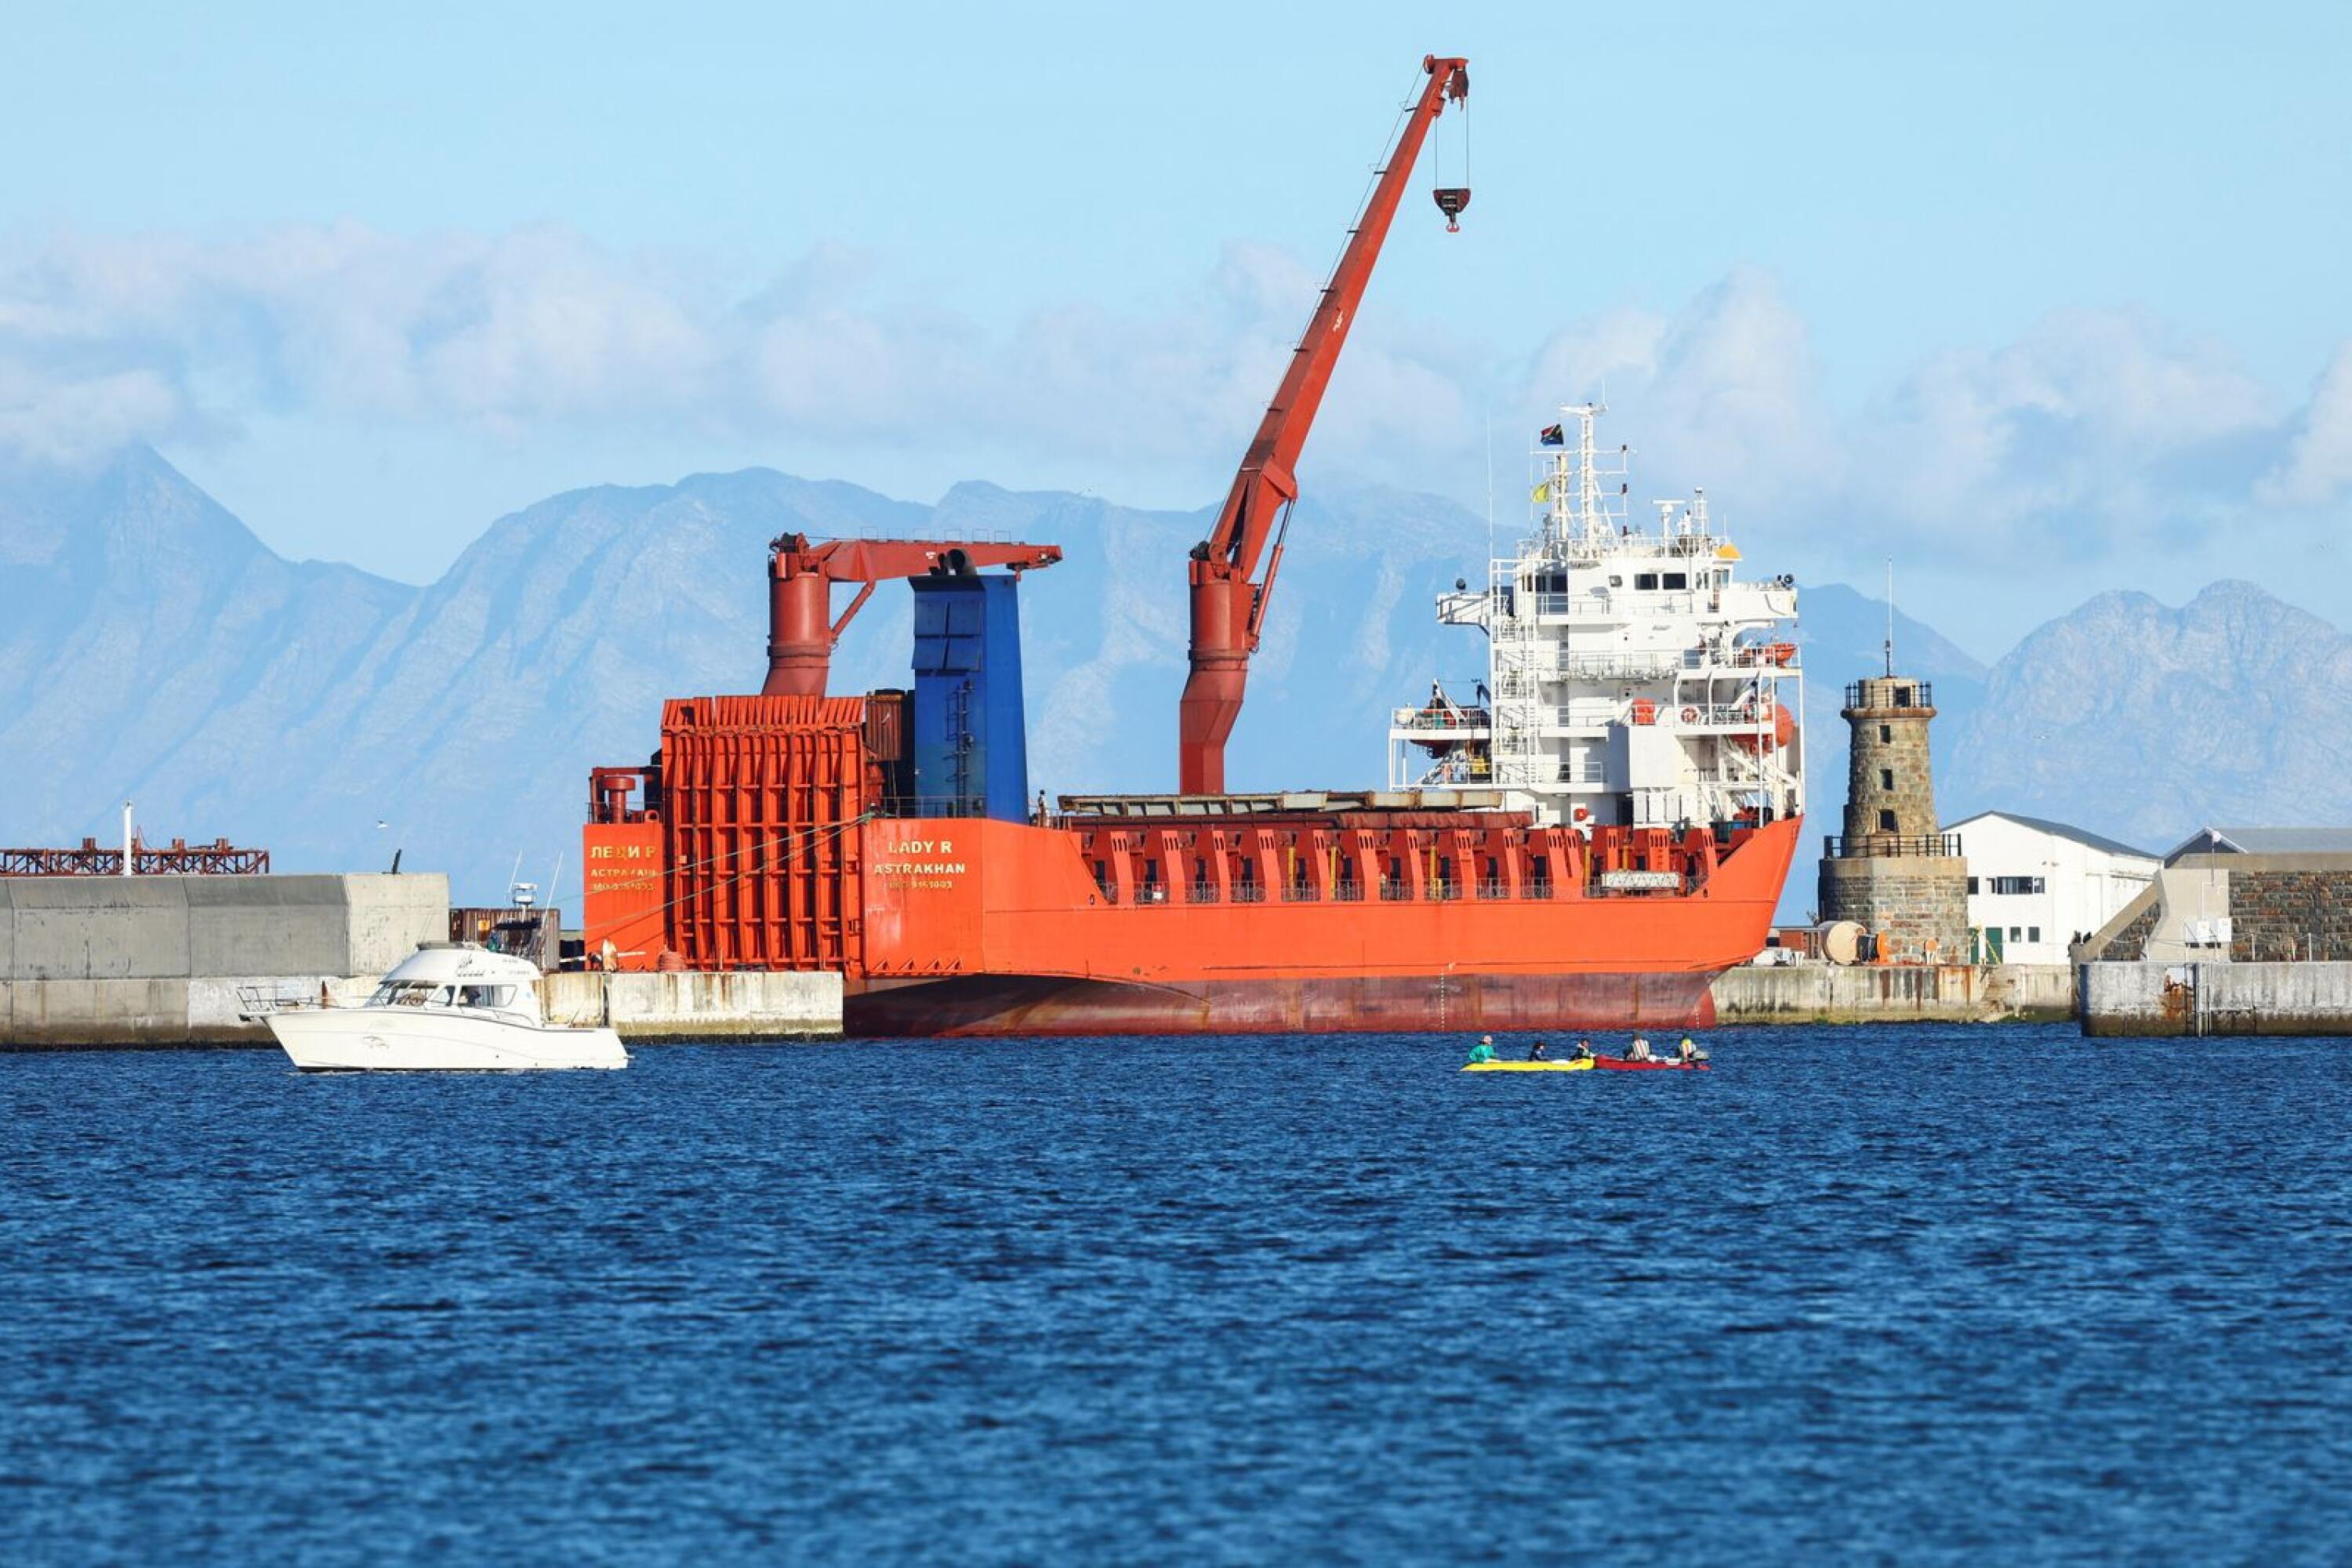 A large red ship is seen with buildings behind it.